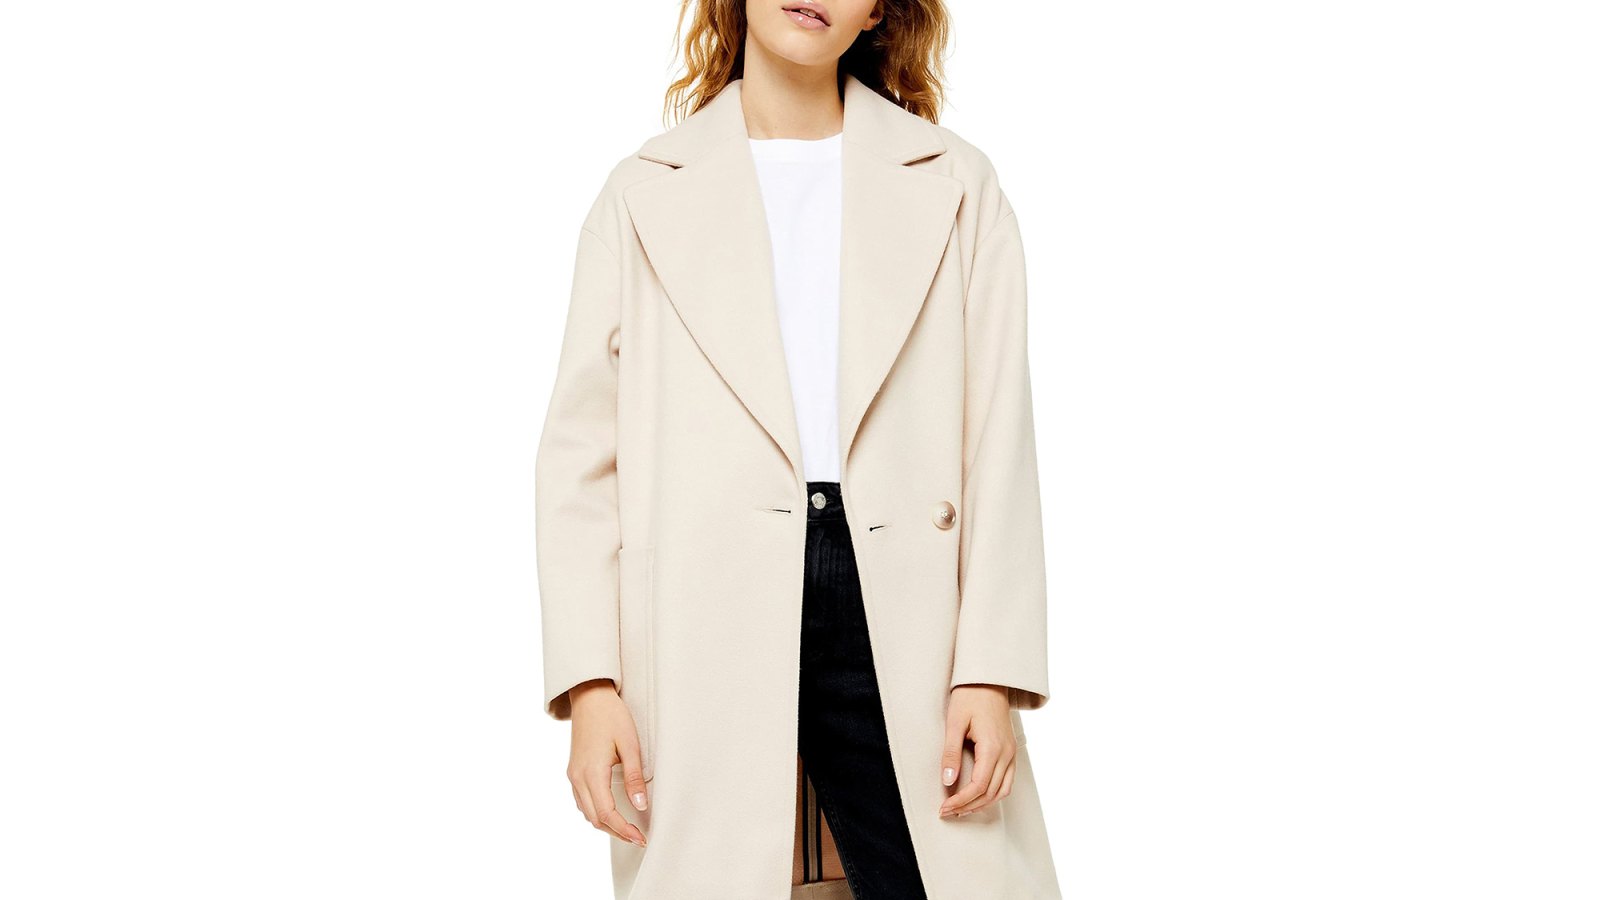 This Topshop Coat Will Solve All of Your Dressing Dilemmas